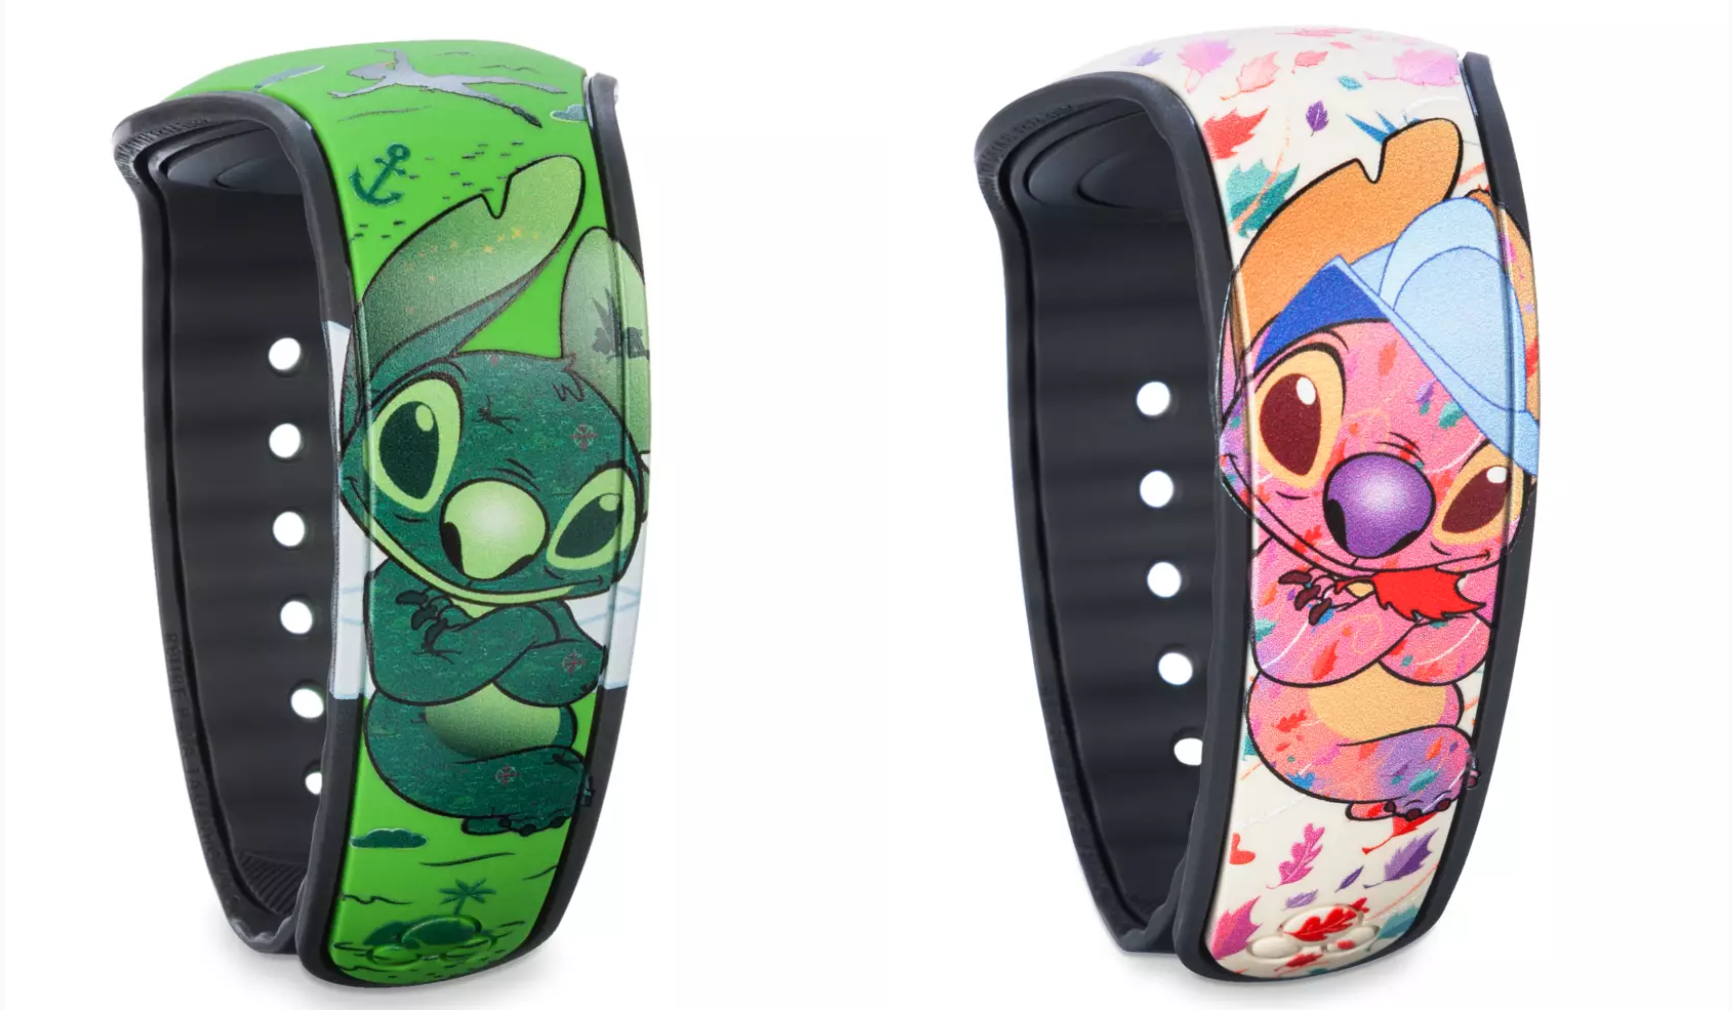 TWO NEW Stitch Crashes Disney MagicBands Now at ShopDisney 